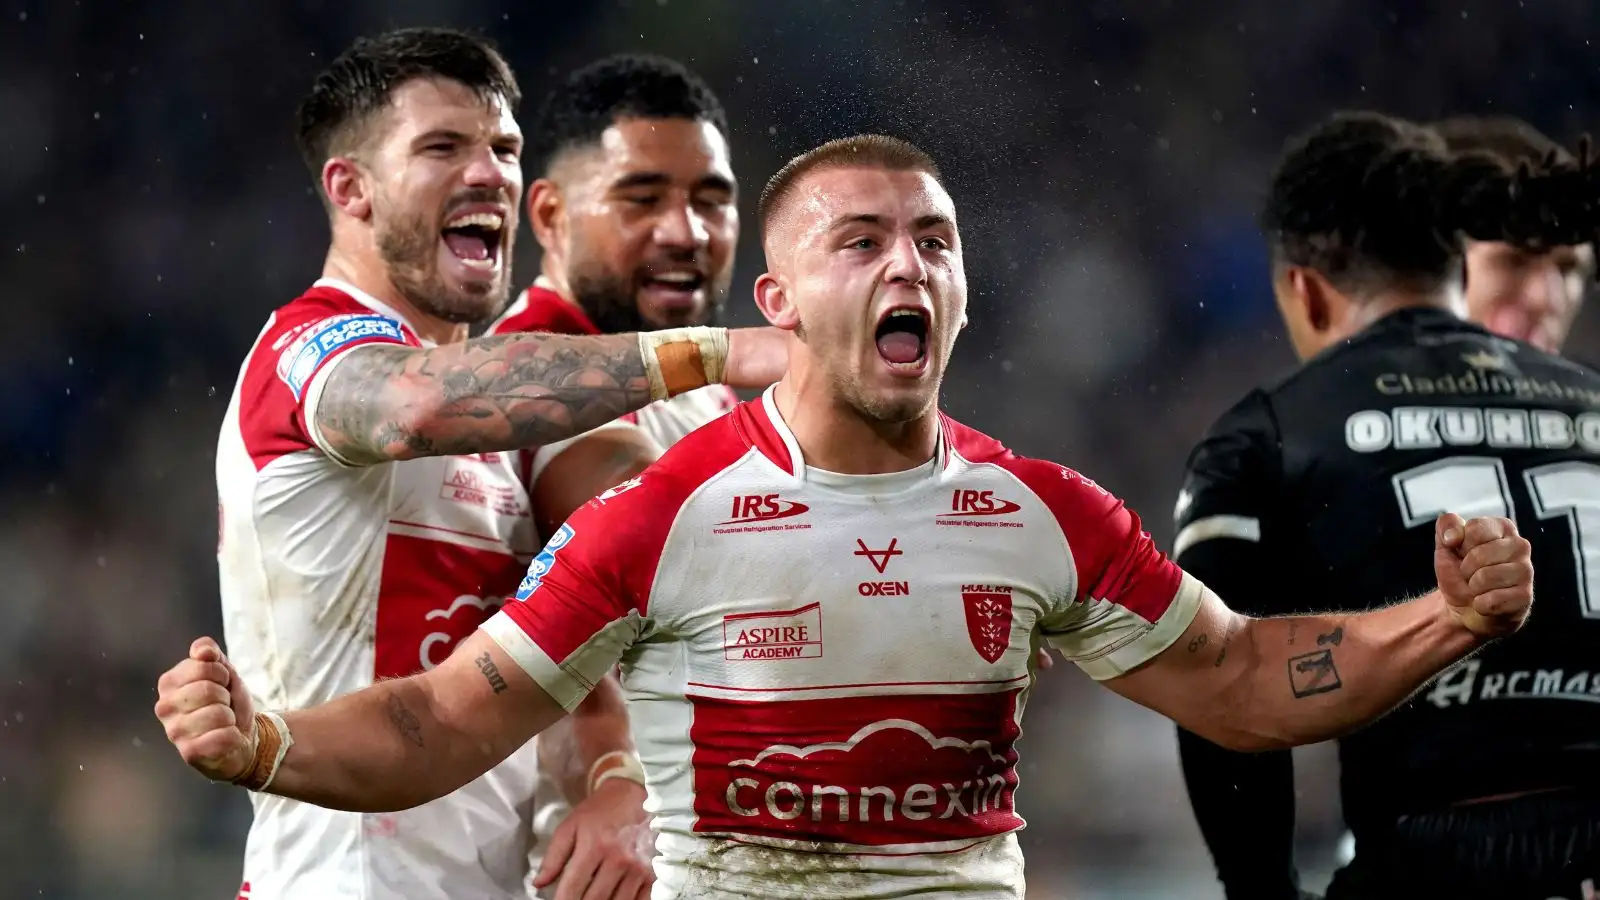 The Debrief: Hull KR’s left-edge, Rovers’ goal-kicking, Hull FC’s familiar woes